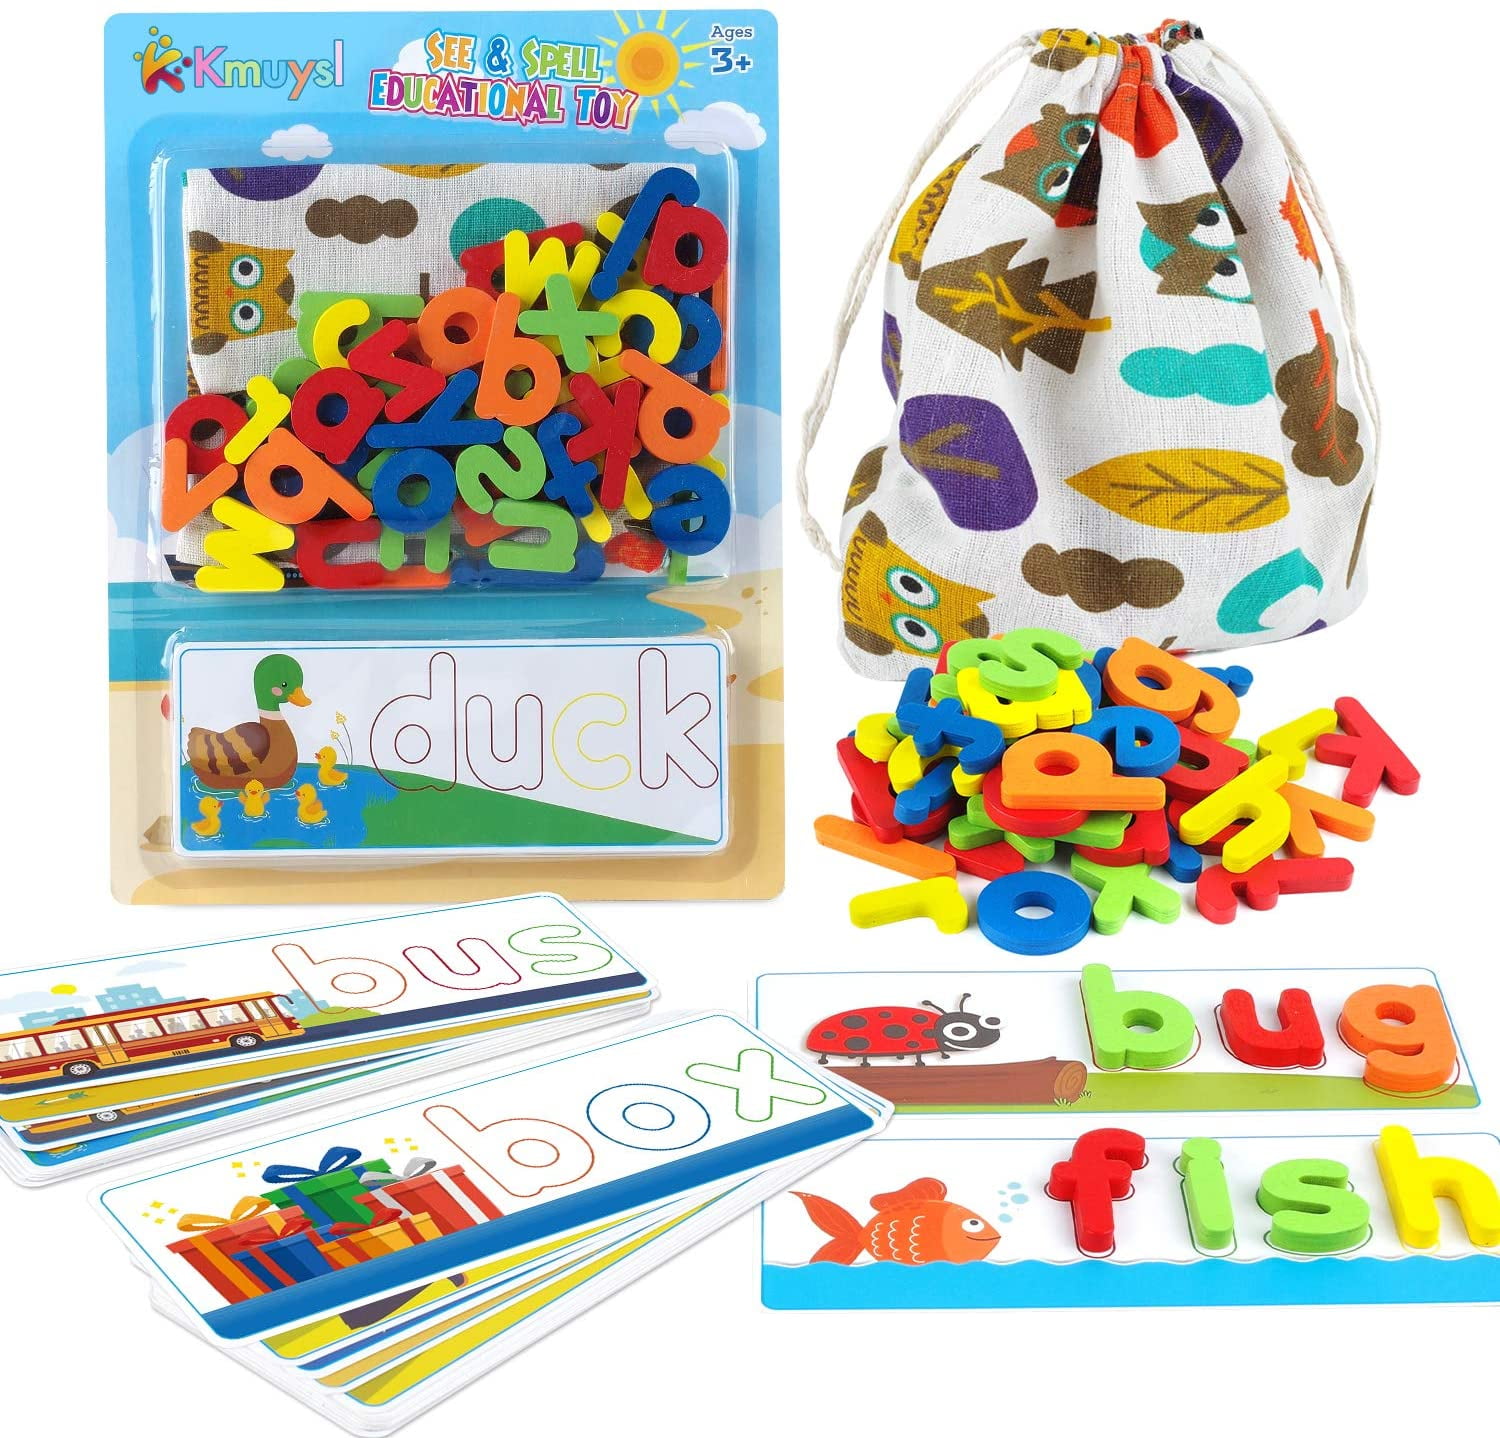 Details about   Wooden Developmental Toy Puzzle Preschool Spelling Matching Letter Game For Kids 